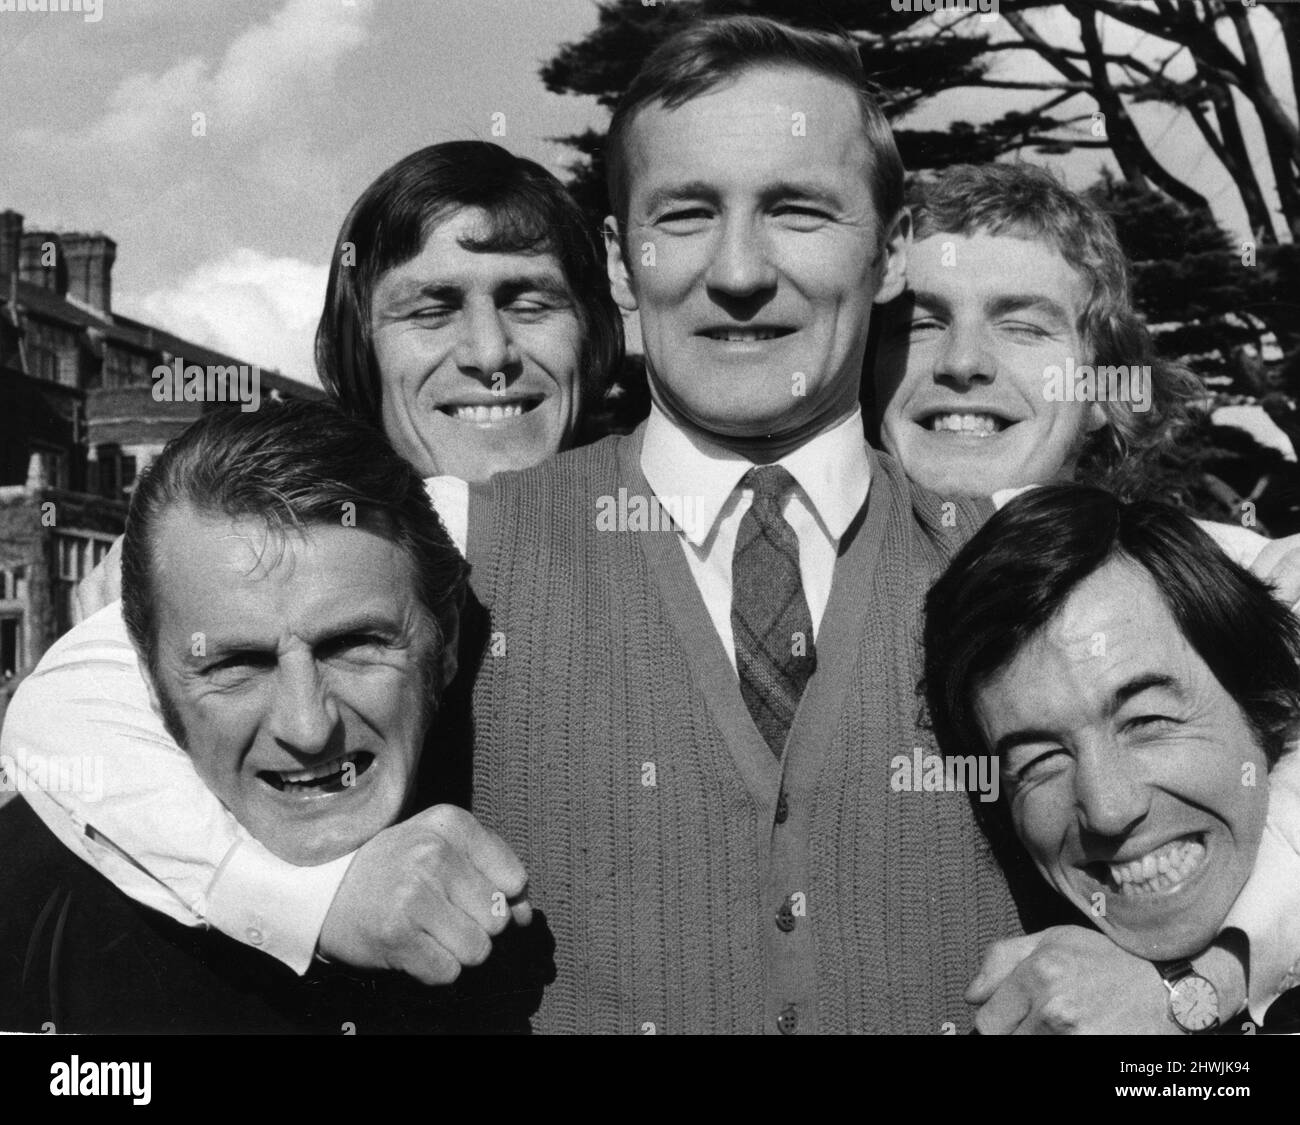 Stoke City captain Peter Dobing relaxes with some of his team-mates before the League Cup final at Wembley on Saturday.  Skipper Dobing had Gordon Banks (right) and George Eastham (left) under his control, whilst John Ritchie (back left) and John Mahoney (back right) watch on.  Date of picture: 2nd March 1972. *** Local Caption *** Football Player    Gbanksobit Stock Photo